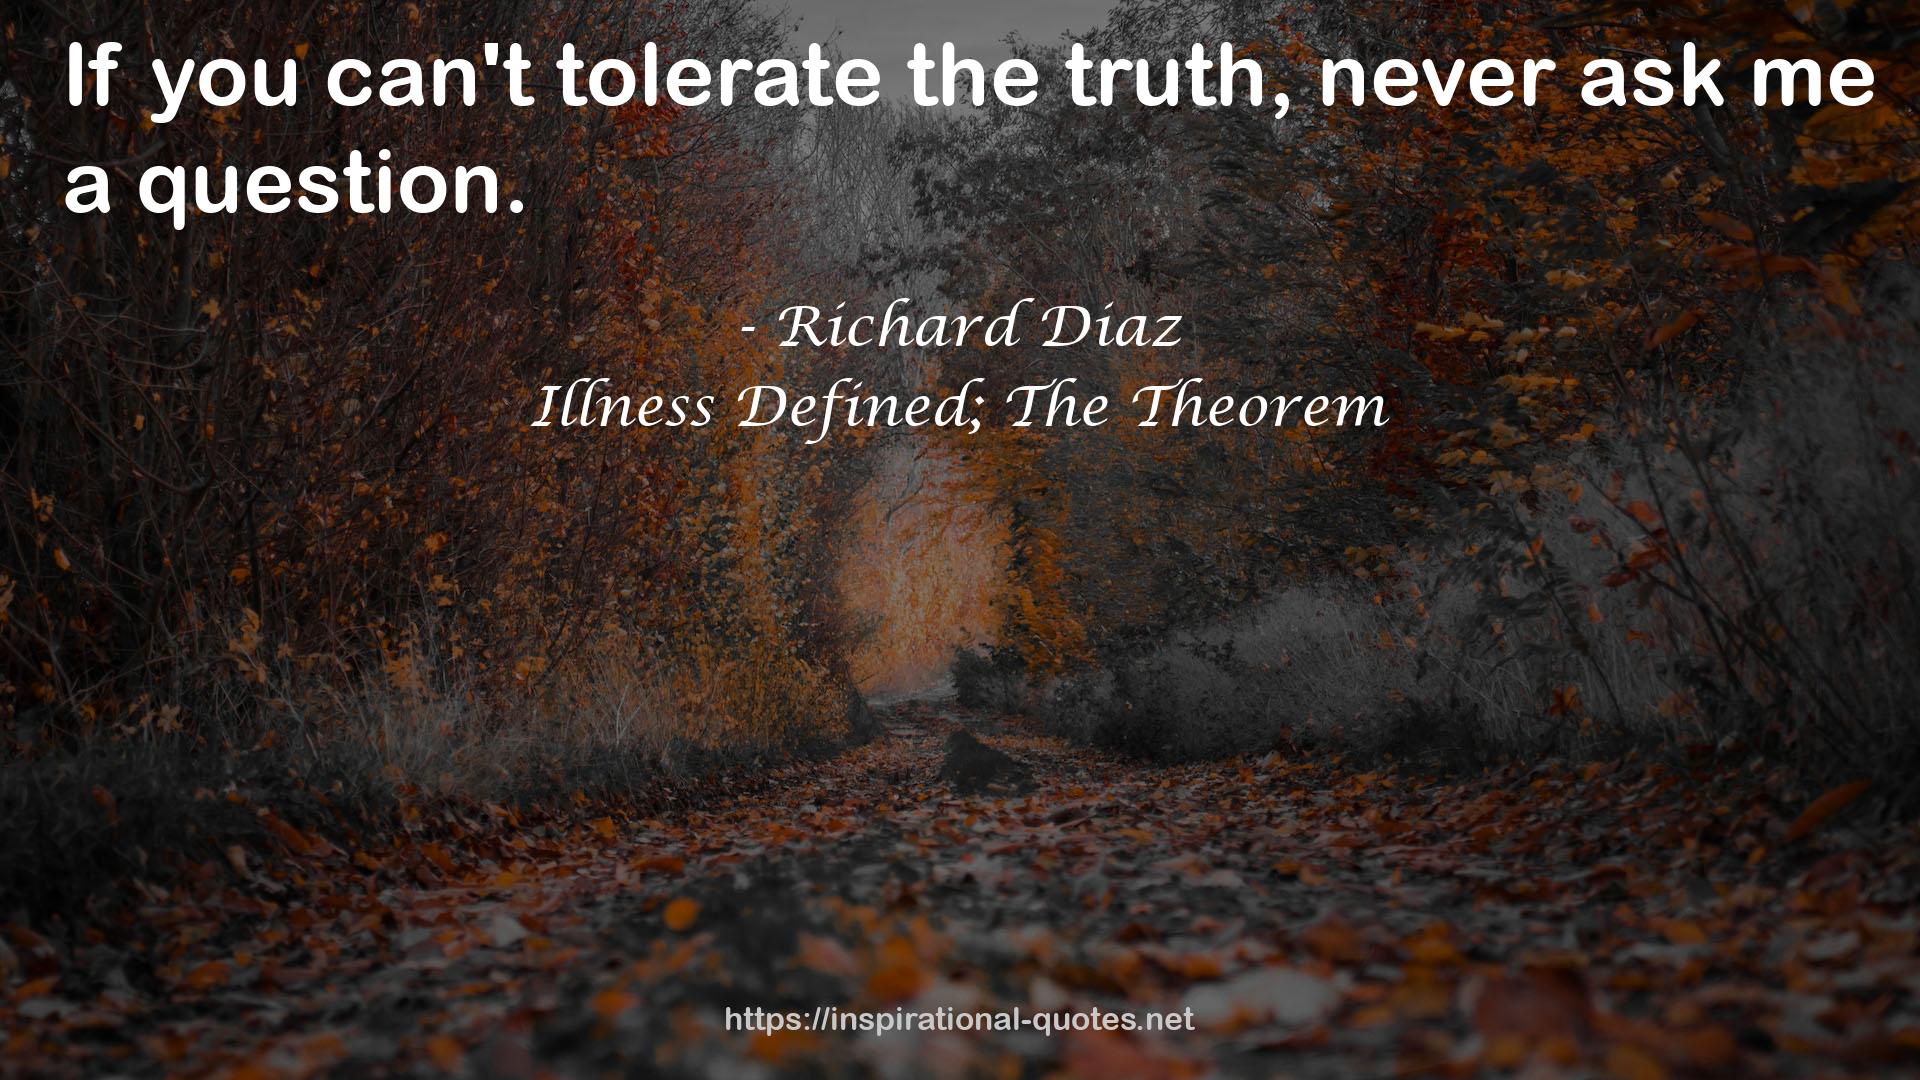 Illness Defined; The Theorem QUOTES